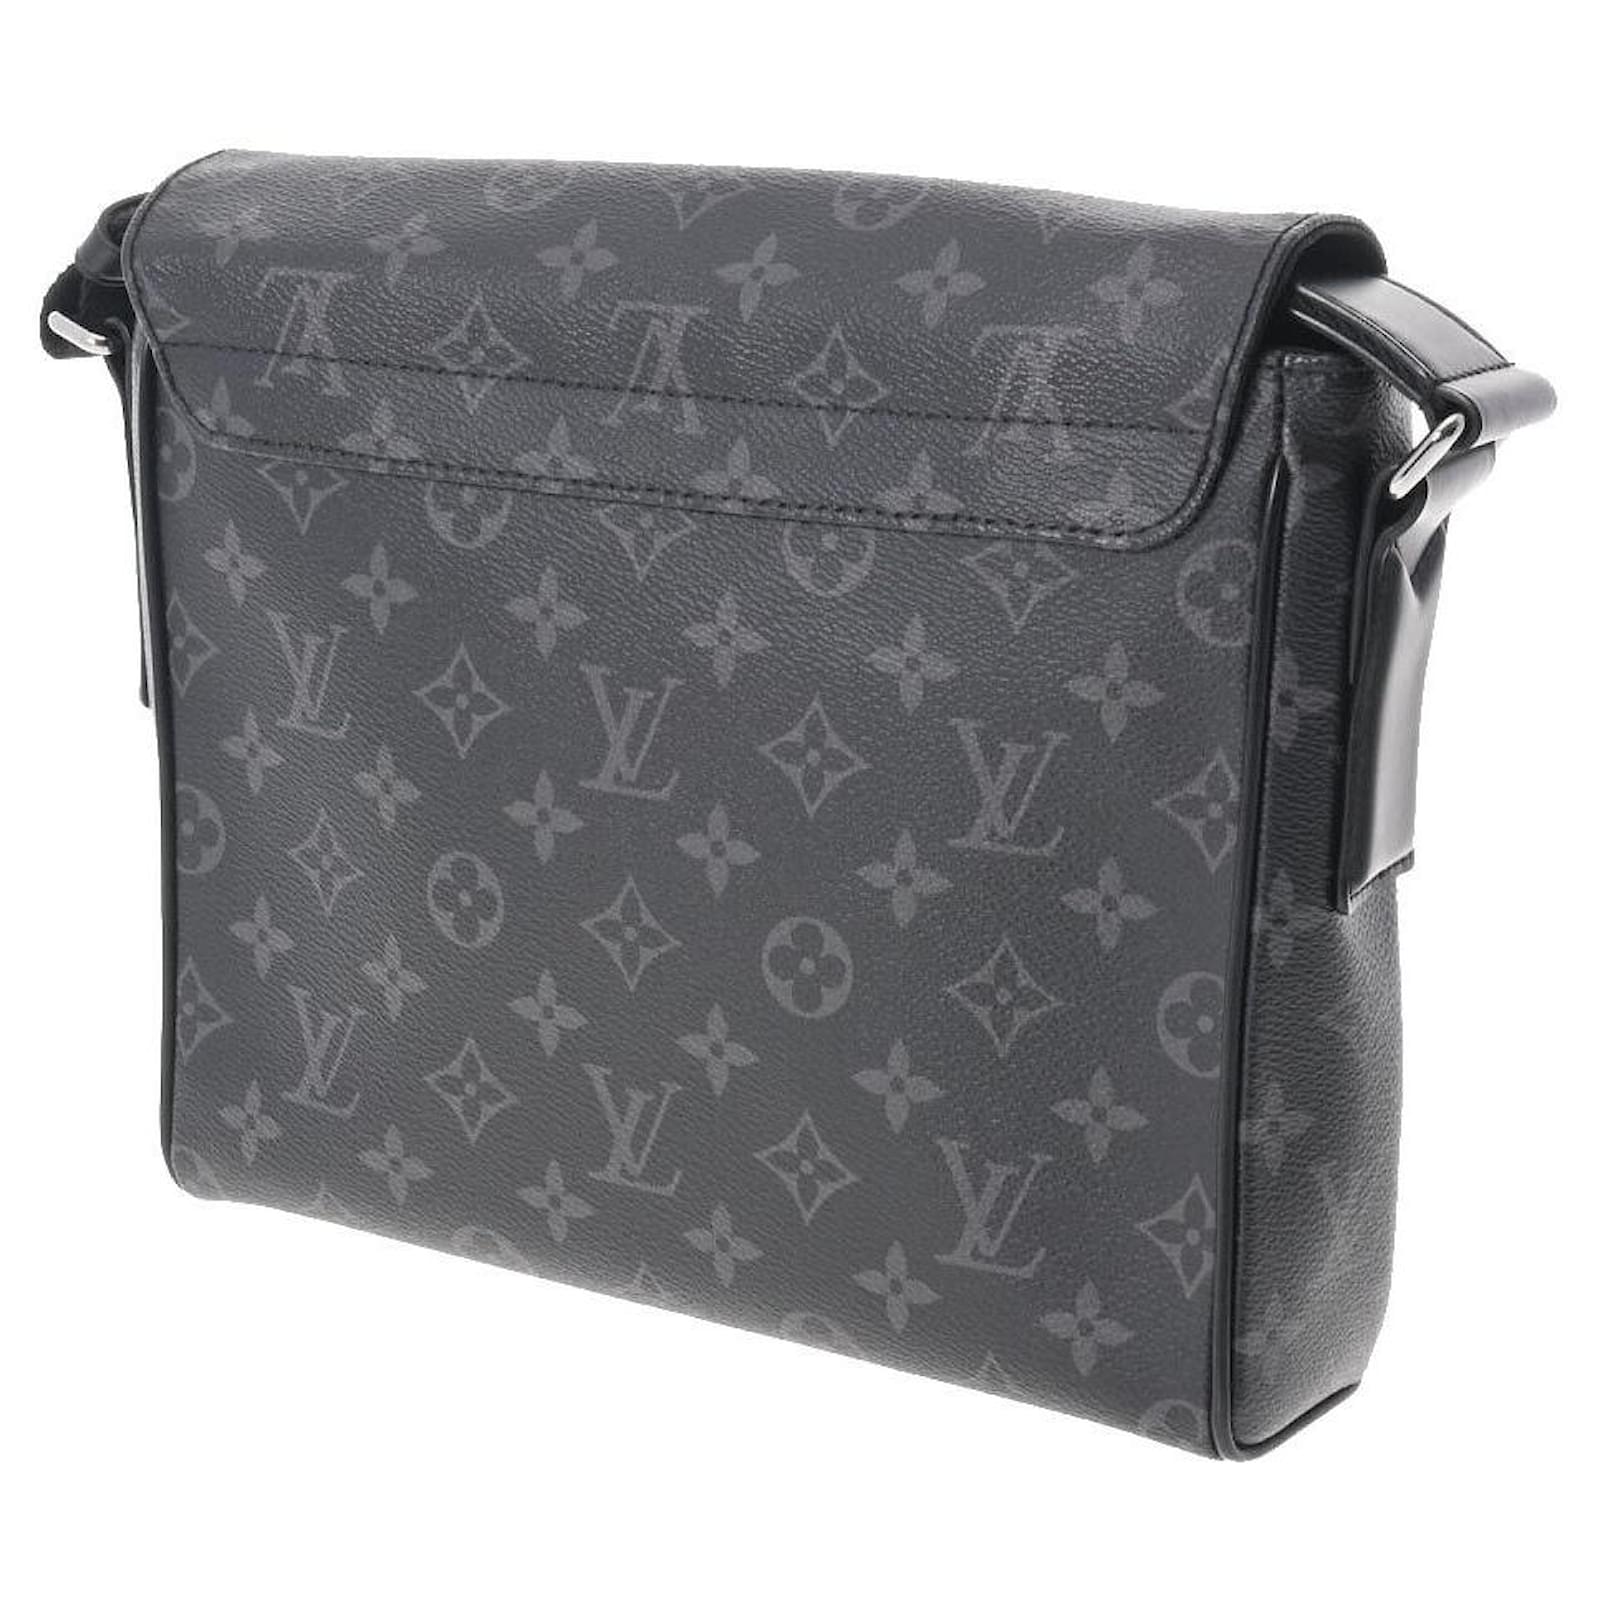 A functional yet stylish twist with this Louis Vuitton Monogram